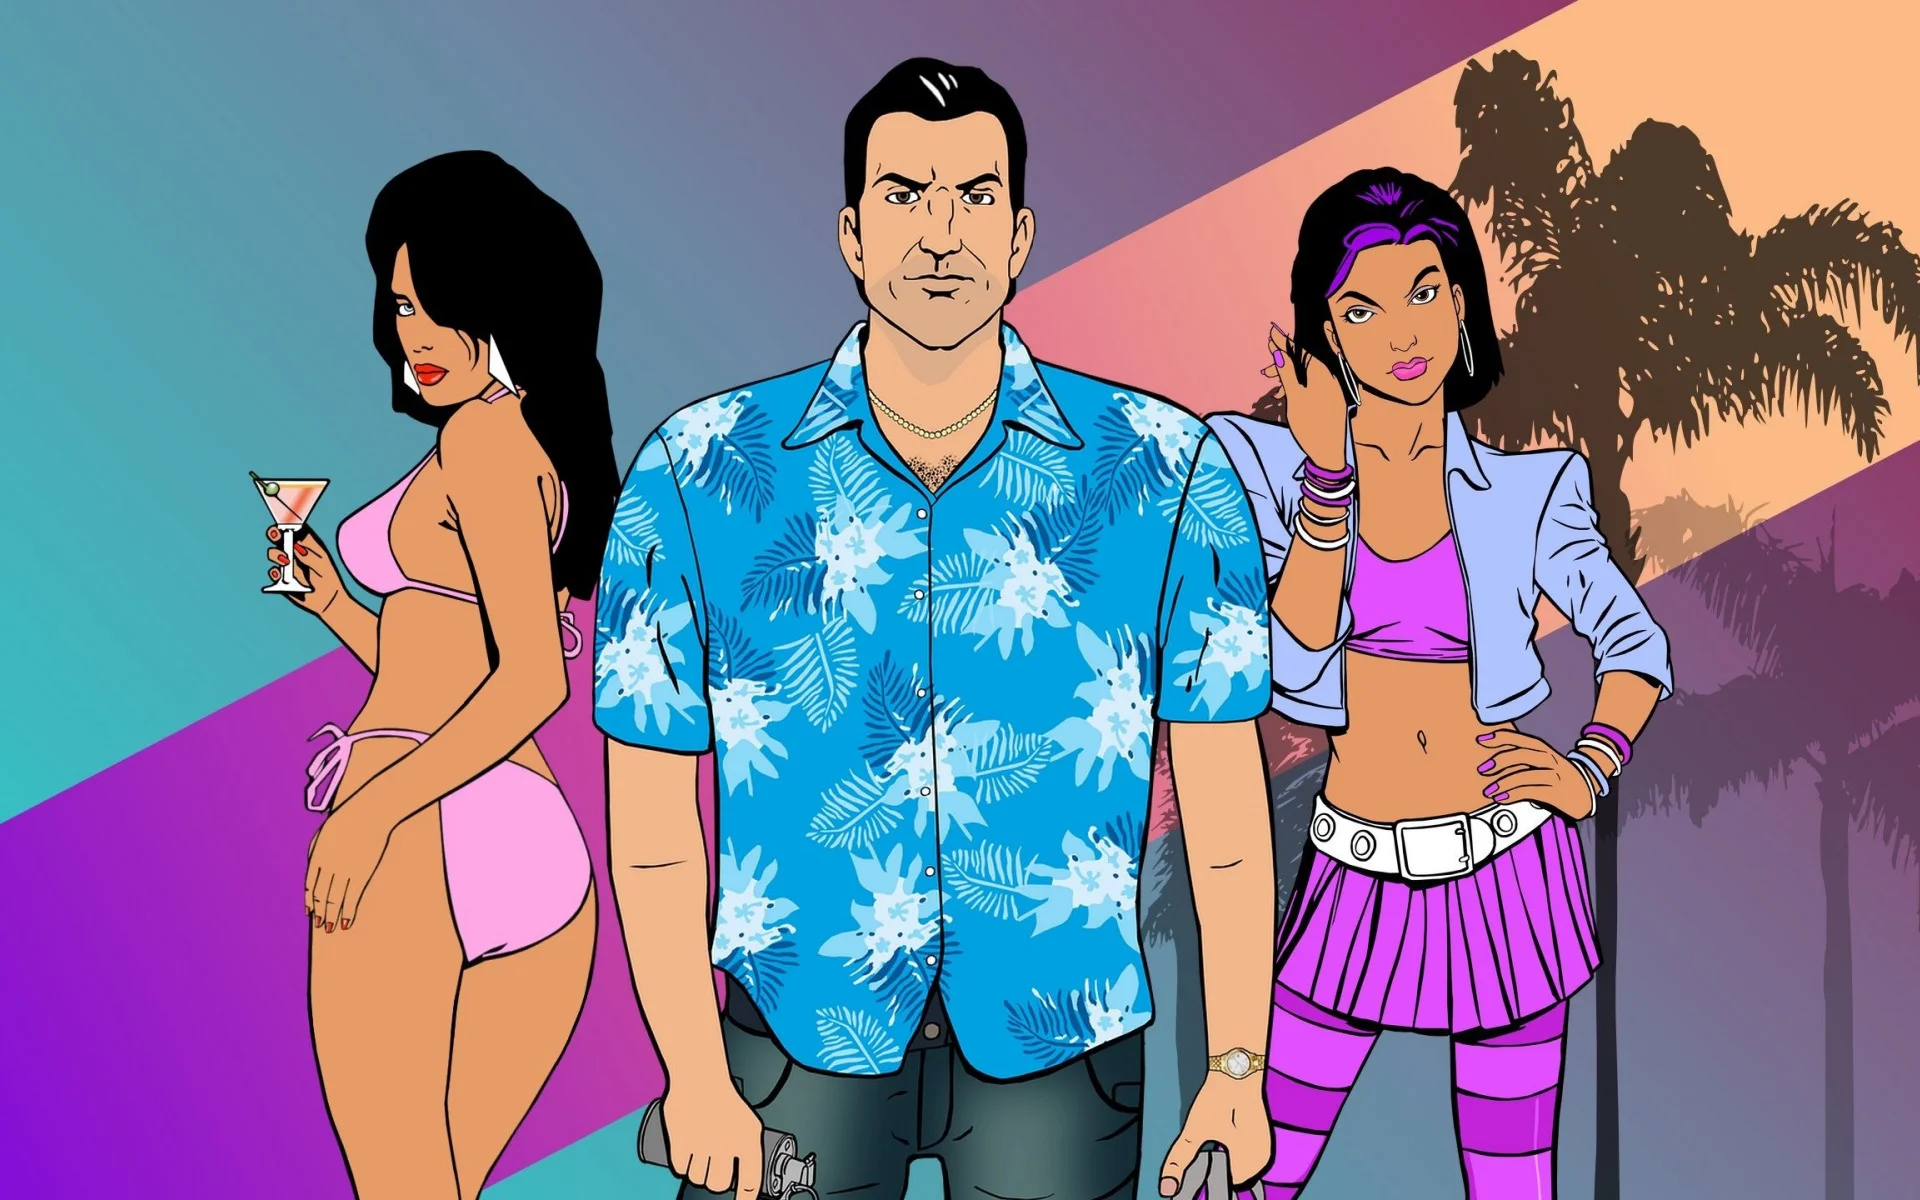 Another video about GTA: Vice City voice acting has been posted